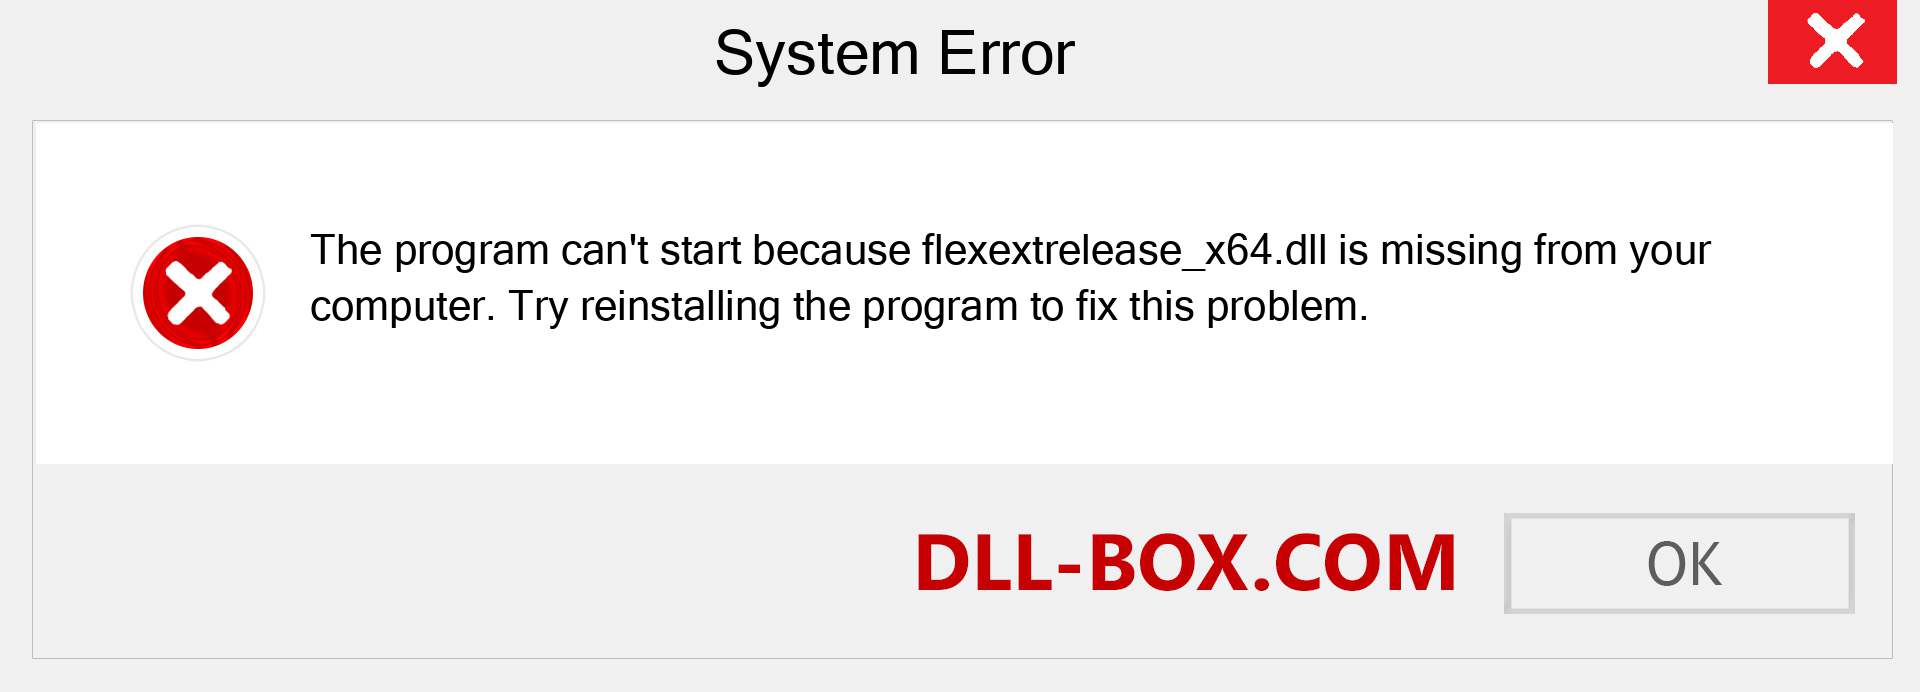  flexextrelease_x64.dll file is missing?. Download for Windows 7, 8, 10 - Fix  flexextrelease_x64 dll Missing Error on Windows, photos, images